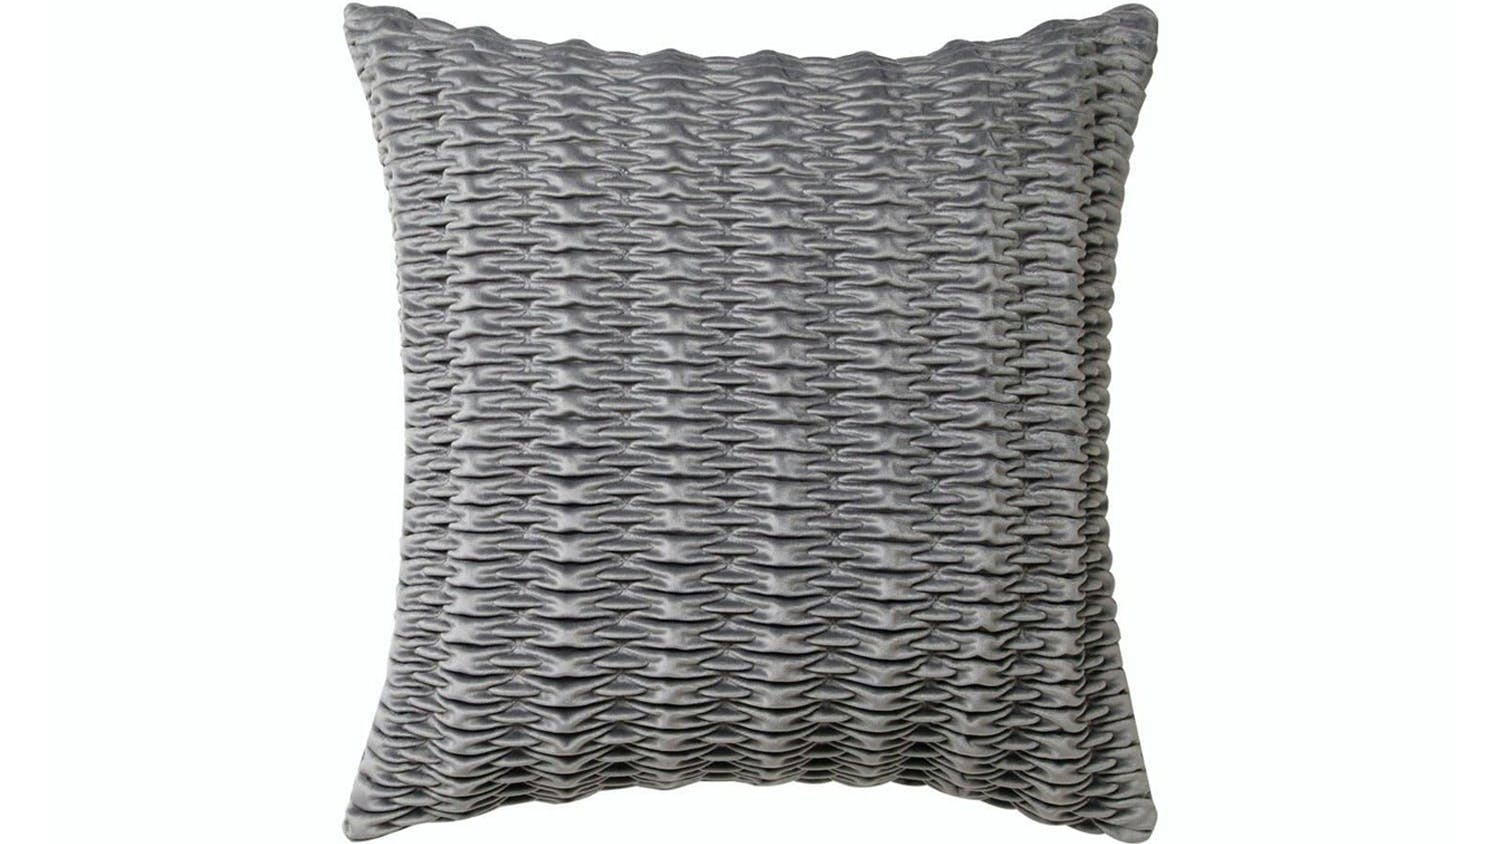 Loxton Square Cushion by Private Collection - Silver